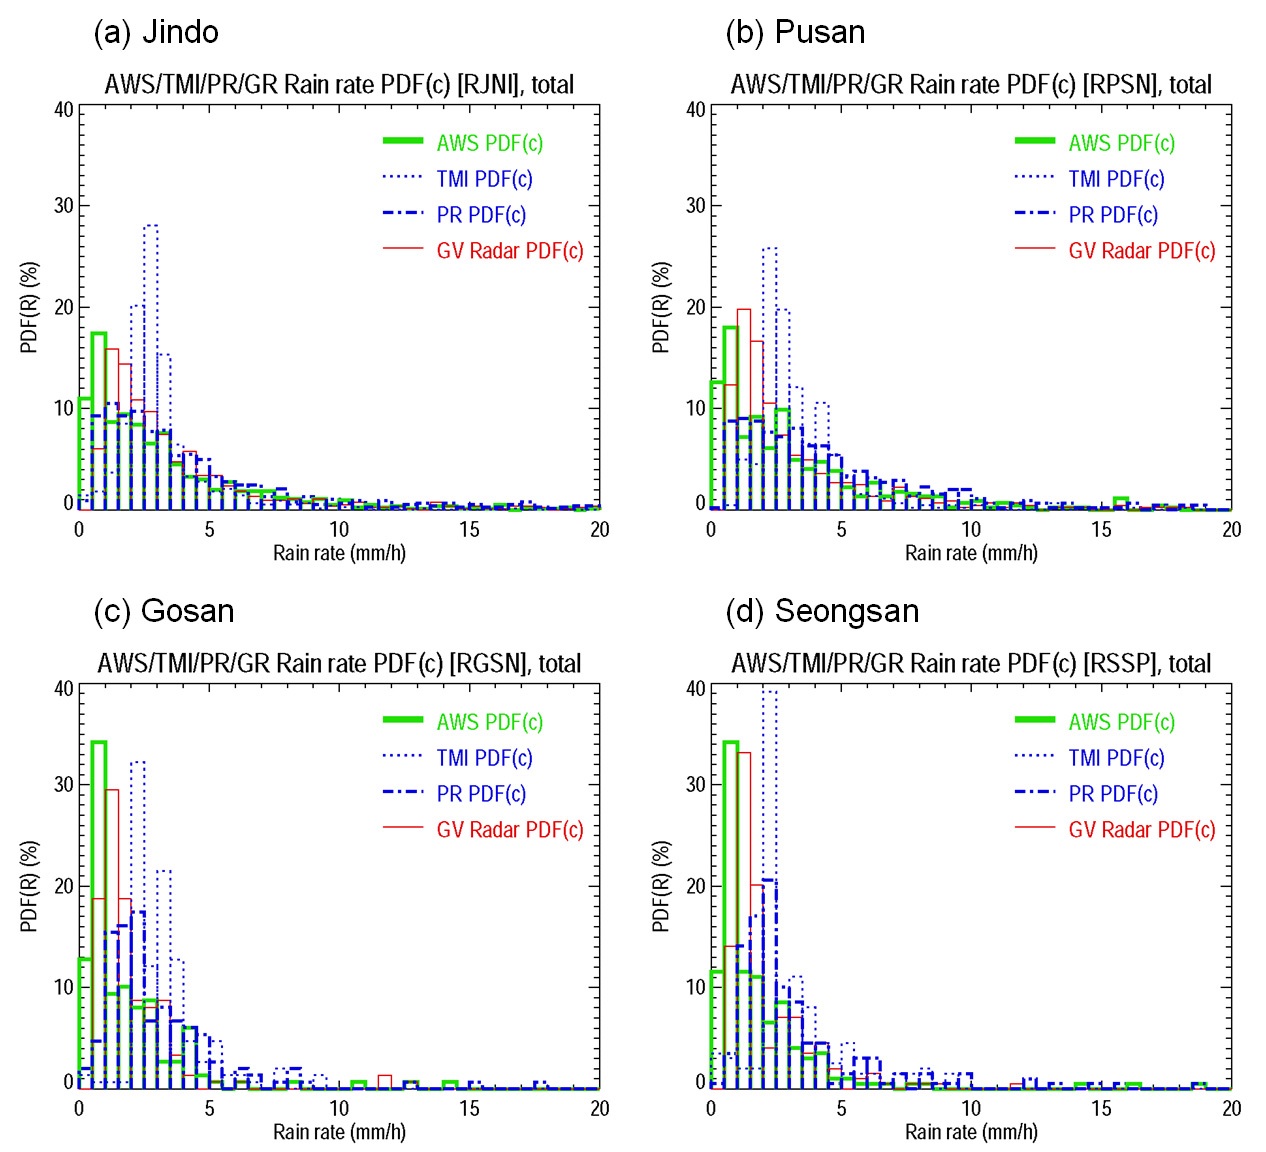 Fig. 4.1.8. Histograms of rain rate for total rain type from AWS (thick solid line), TMI (dotted line), PR (dashed and dotted line), and GR (thin solid line) over region within 100 km radius of (a) RJNI, (b) RPSN, (c) RGSN, and (d) RSSP from August 2006 to May 2008. (binsize=0.5 mm/h)